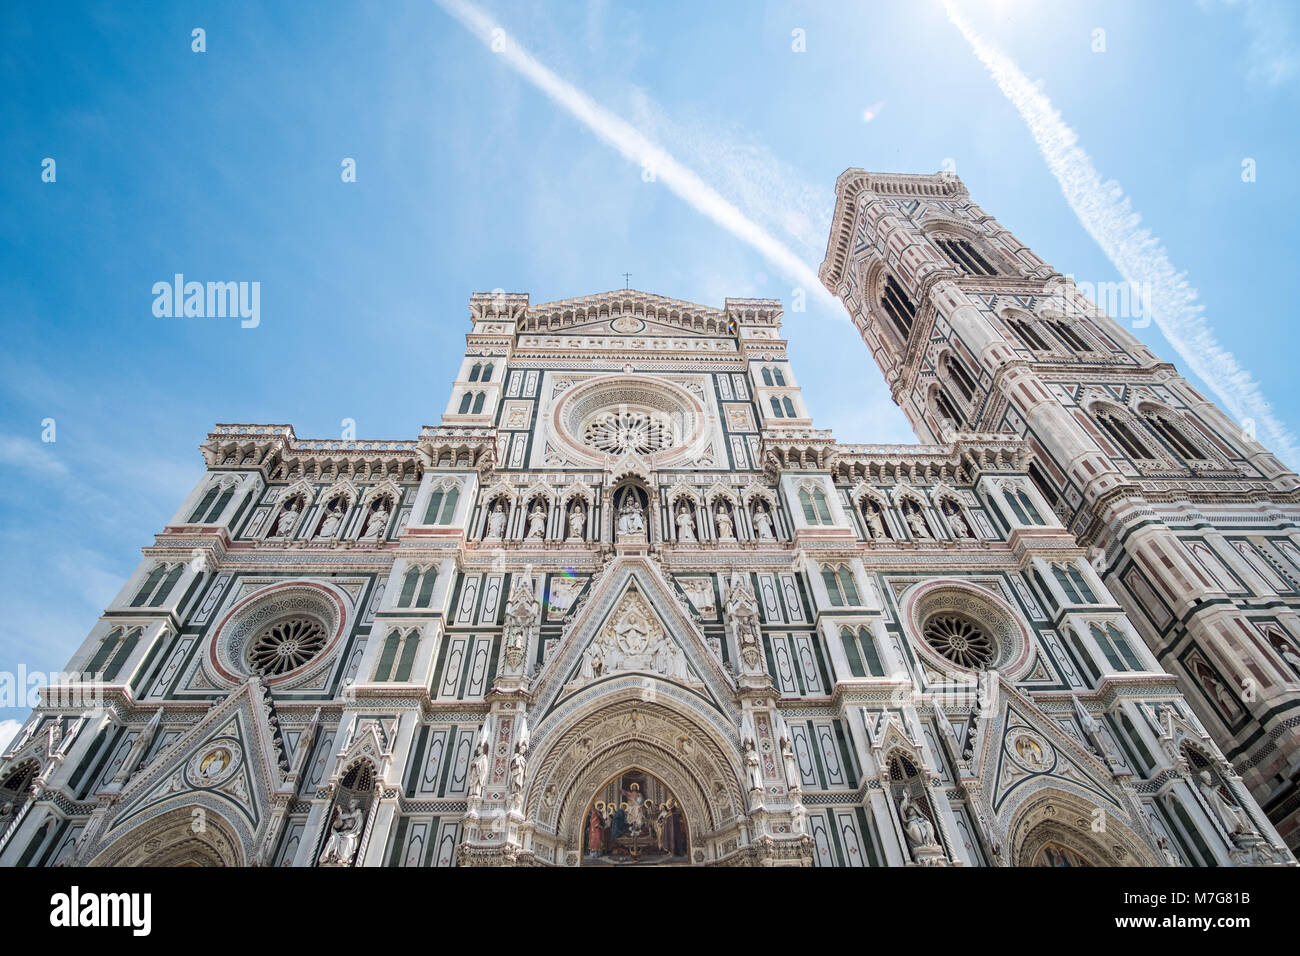 Detail of Florence Duomo Cathedral. Basilica di Santa Maria del Fiore or Basilica of Saint Mary of the Flower in Florence, Italy. Stock Photo